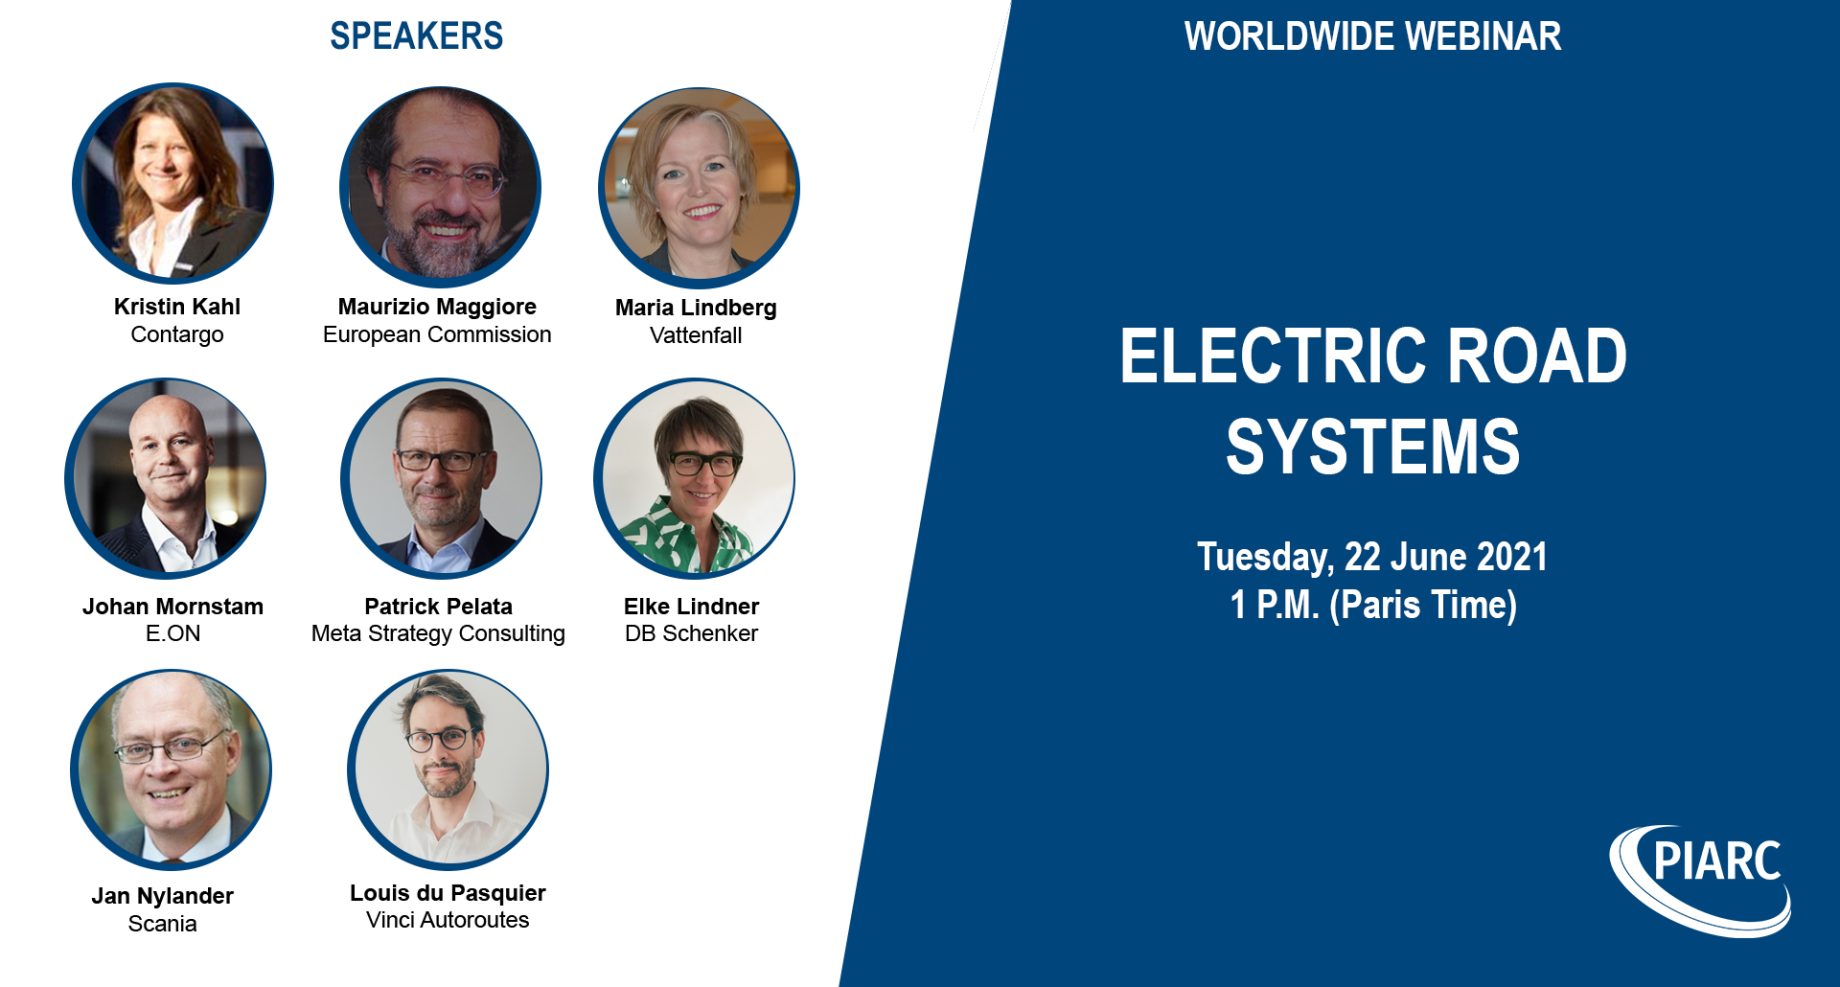 Join the second PIARC webinar on Electric Road Systems
on 22 June!